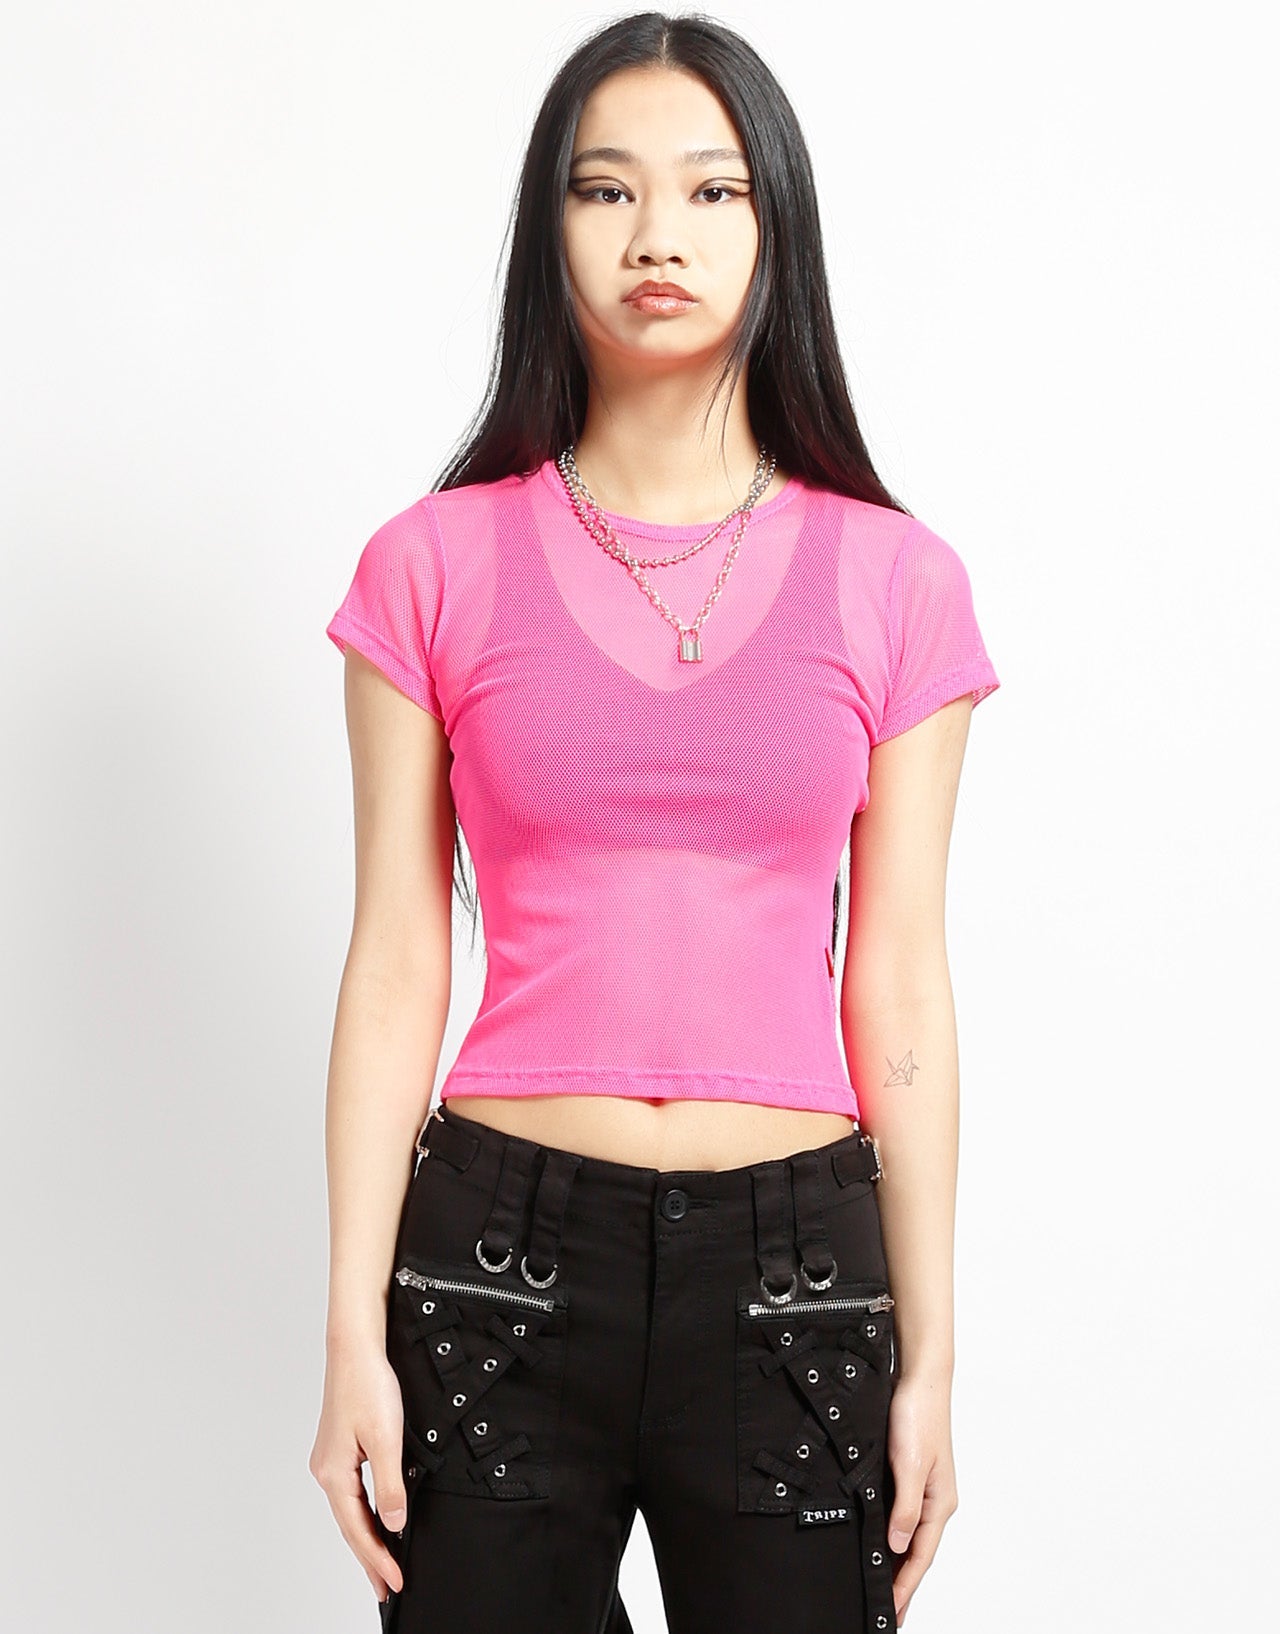 A model wearing the pink Baby Short Sleeve Fishnet Tee Shirt with black pants, front view.